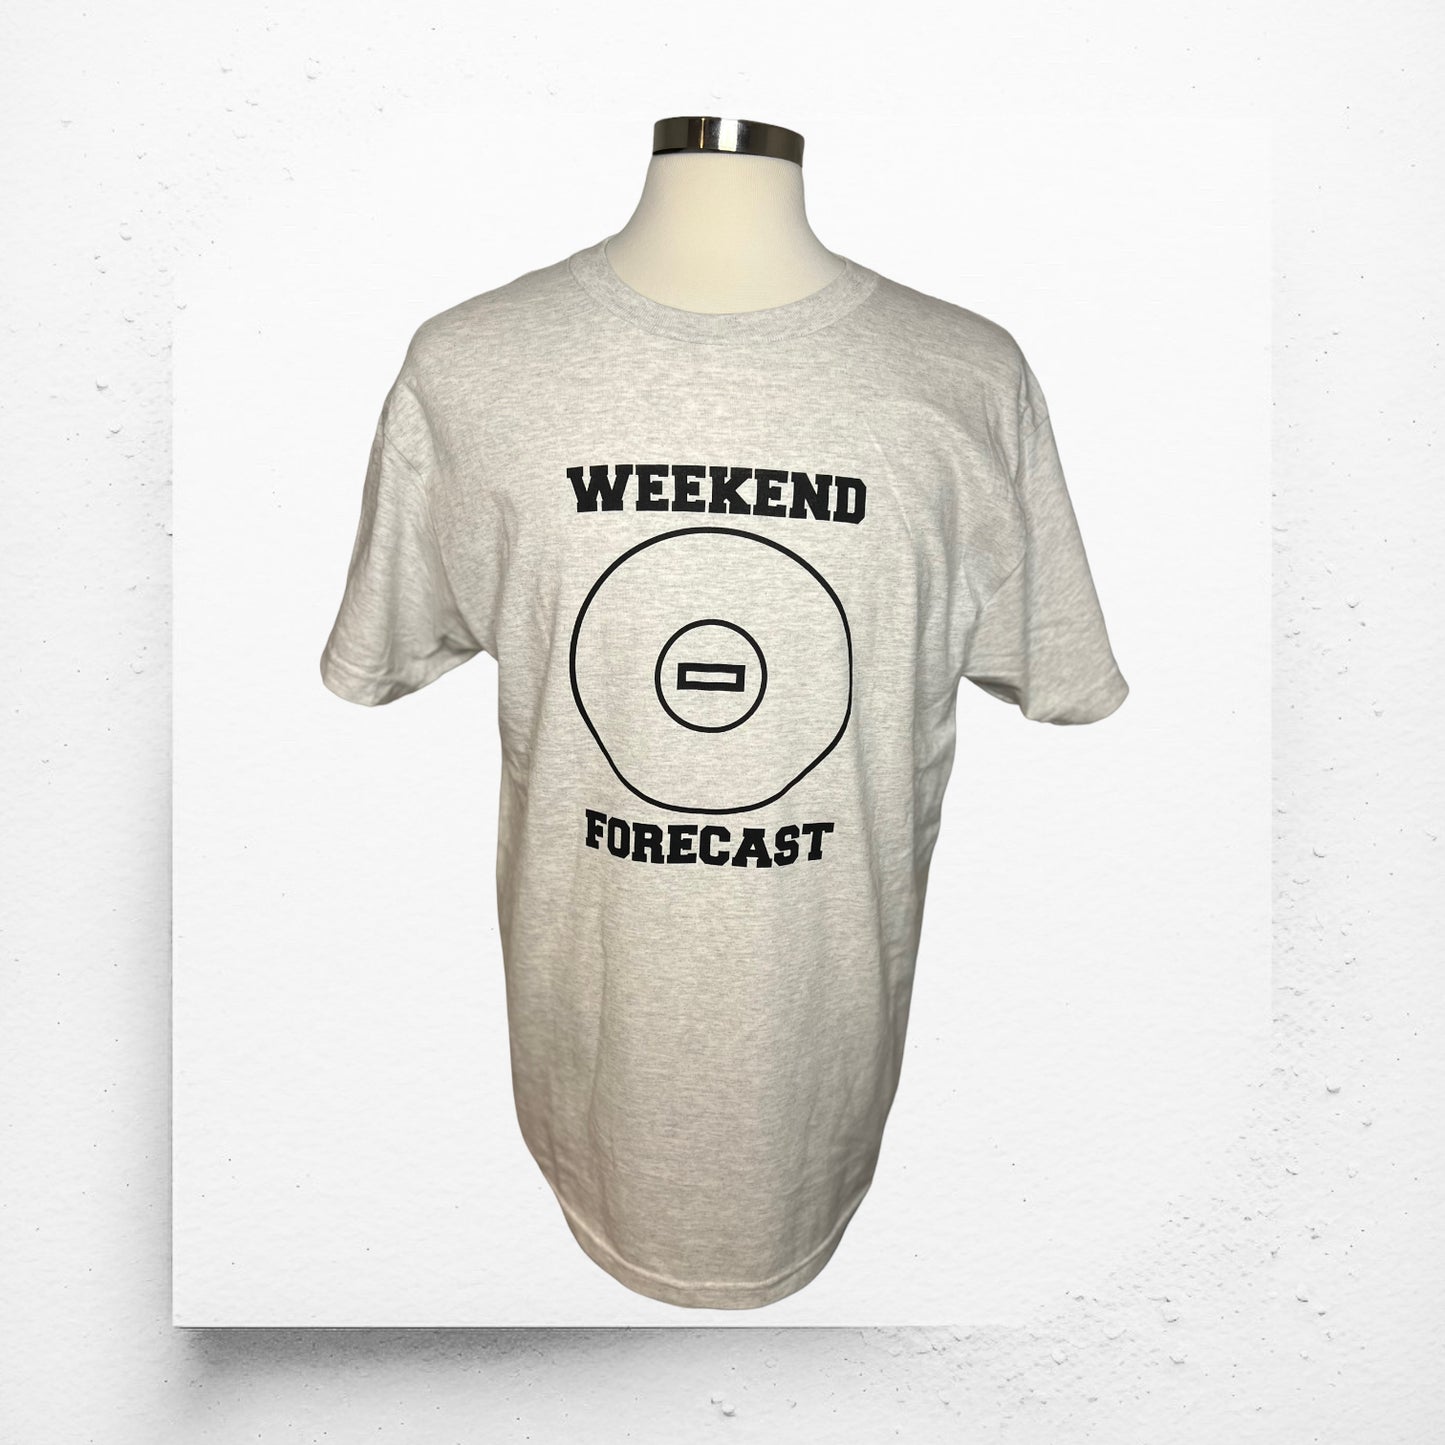 Weekend Forecast Short Sleeve Graphic T